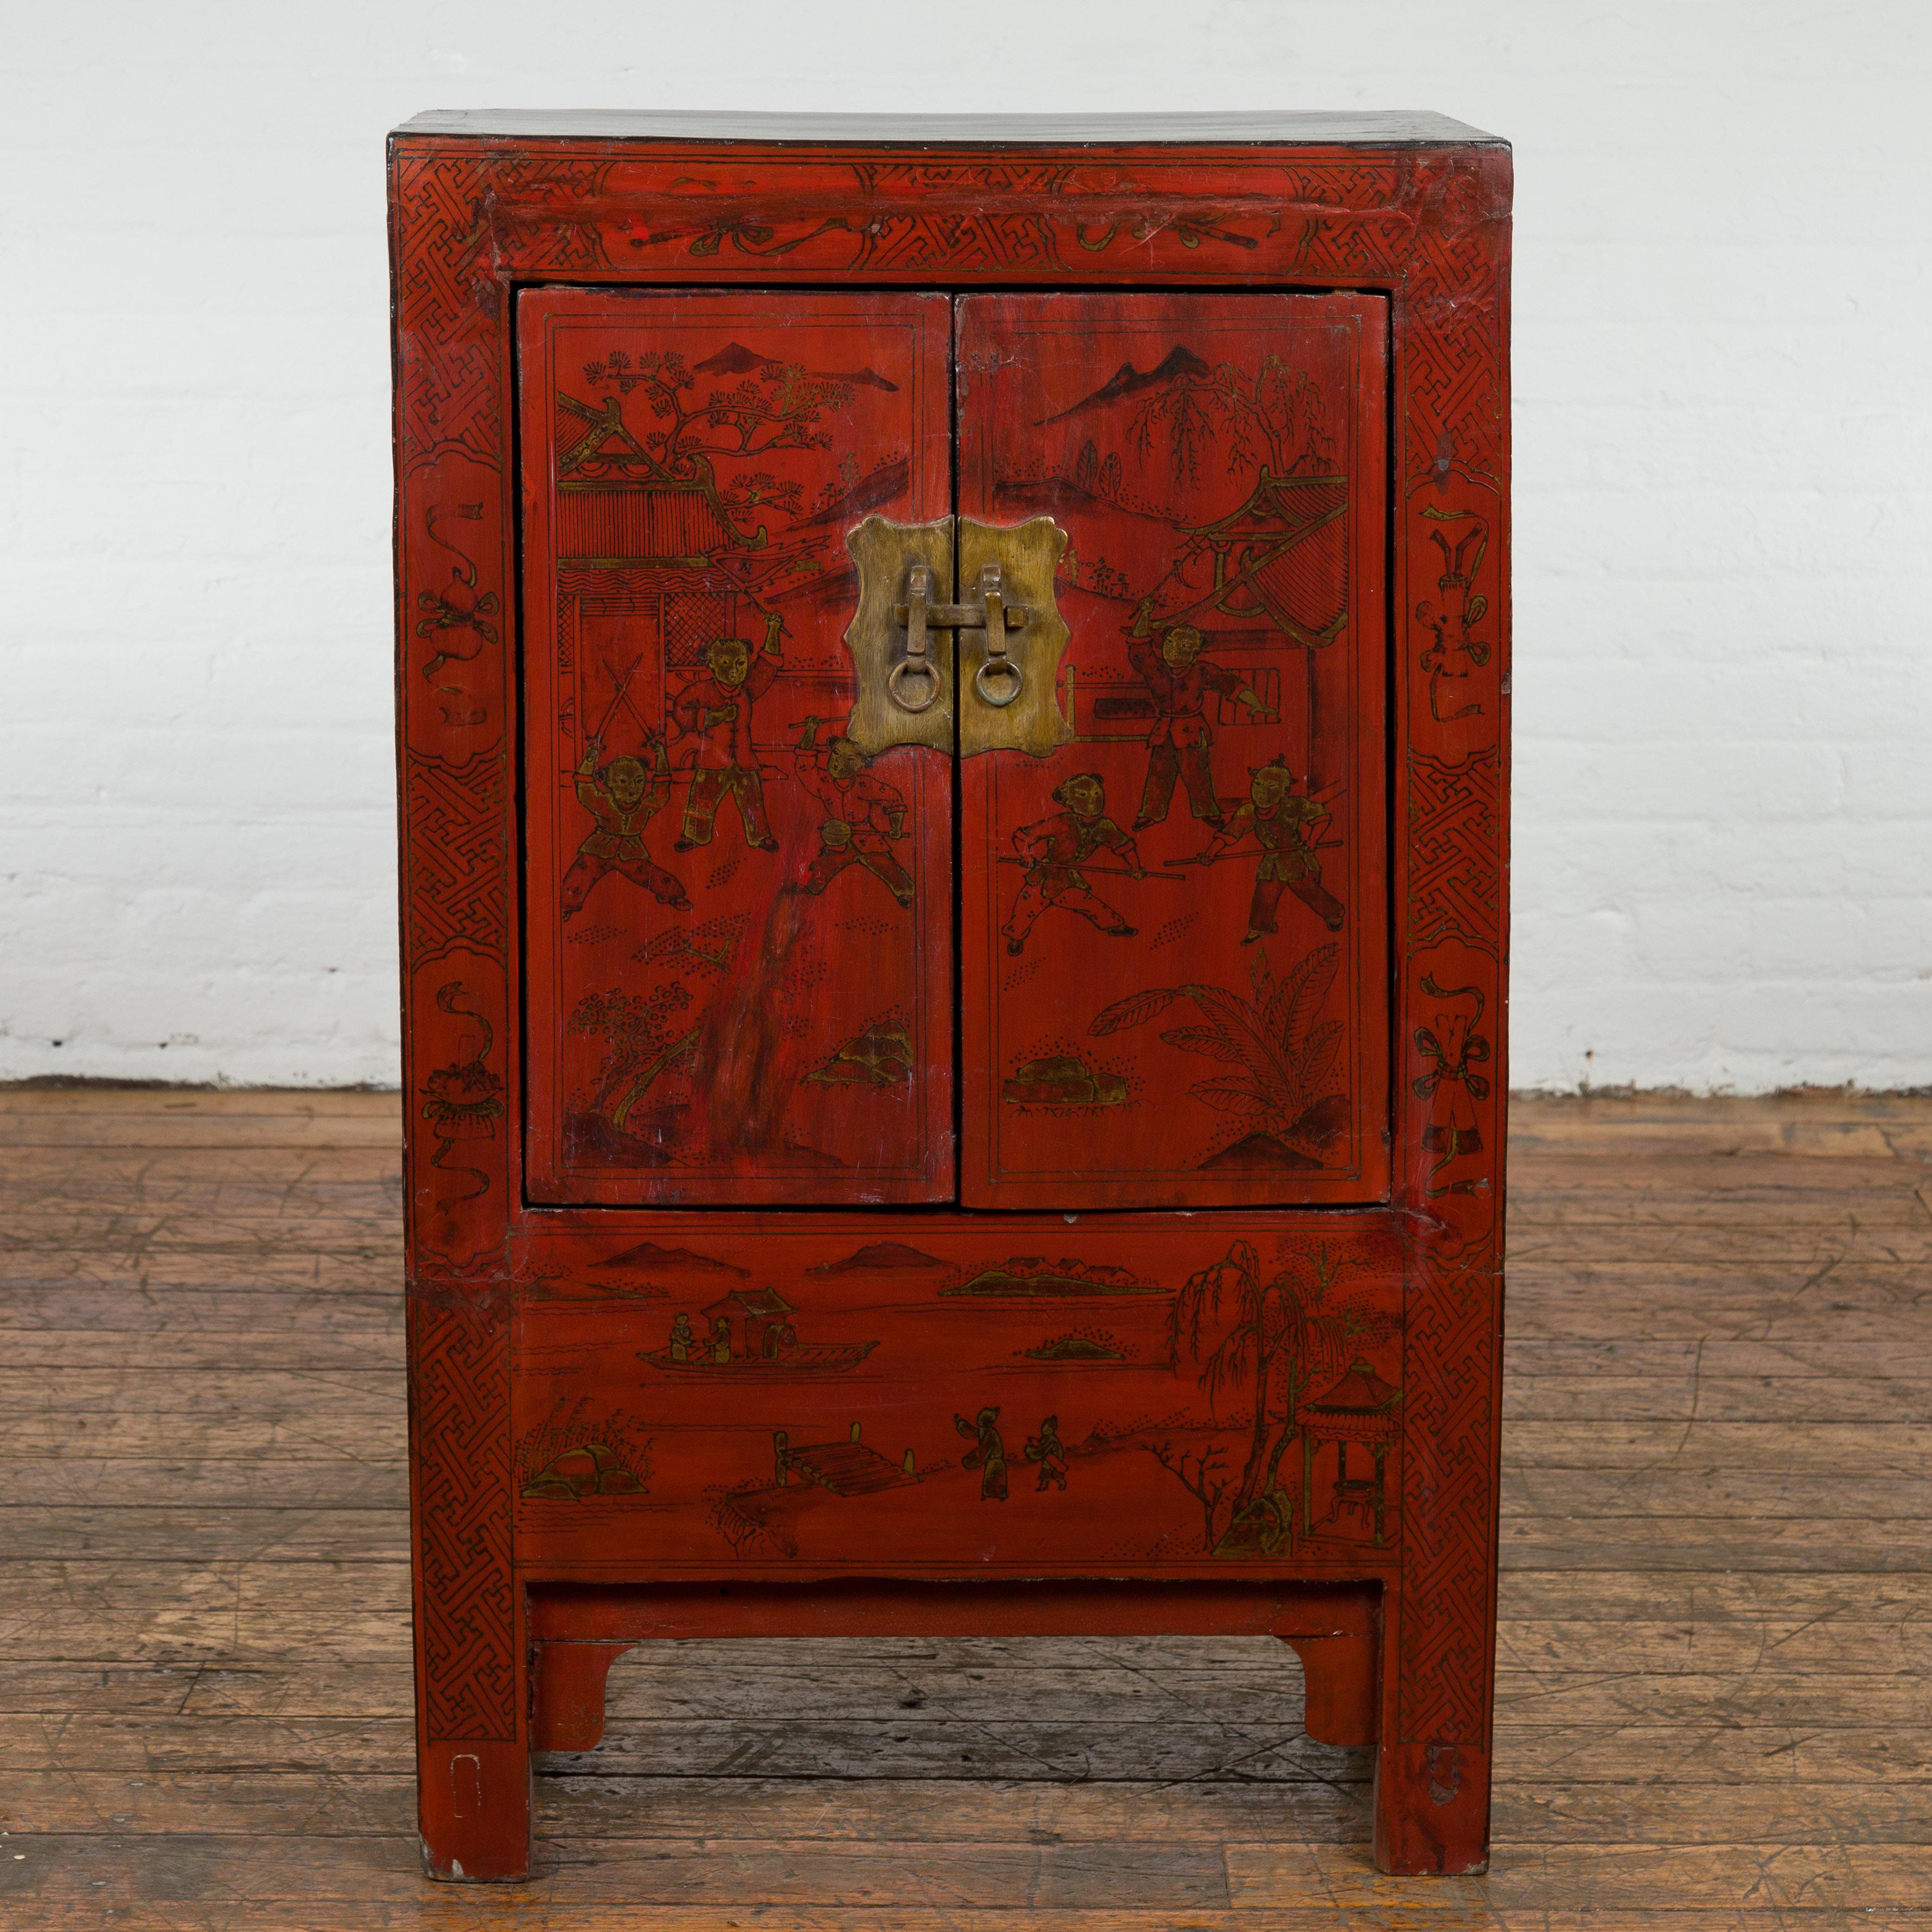 A Chinese Qing Dynasty period red lacquer bedside cabinet from the 19th century with hand-painted décor and golden highlights. Showcasing stunning craftsmanship and artistic vision, this 19th century Qing Dynasty red lacquer bedside cabinet from